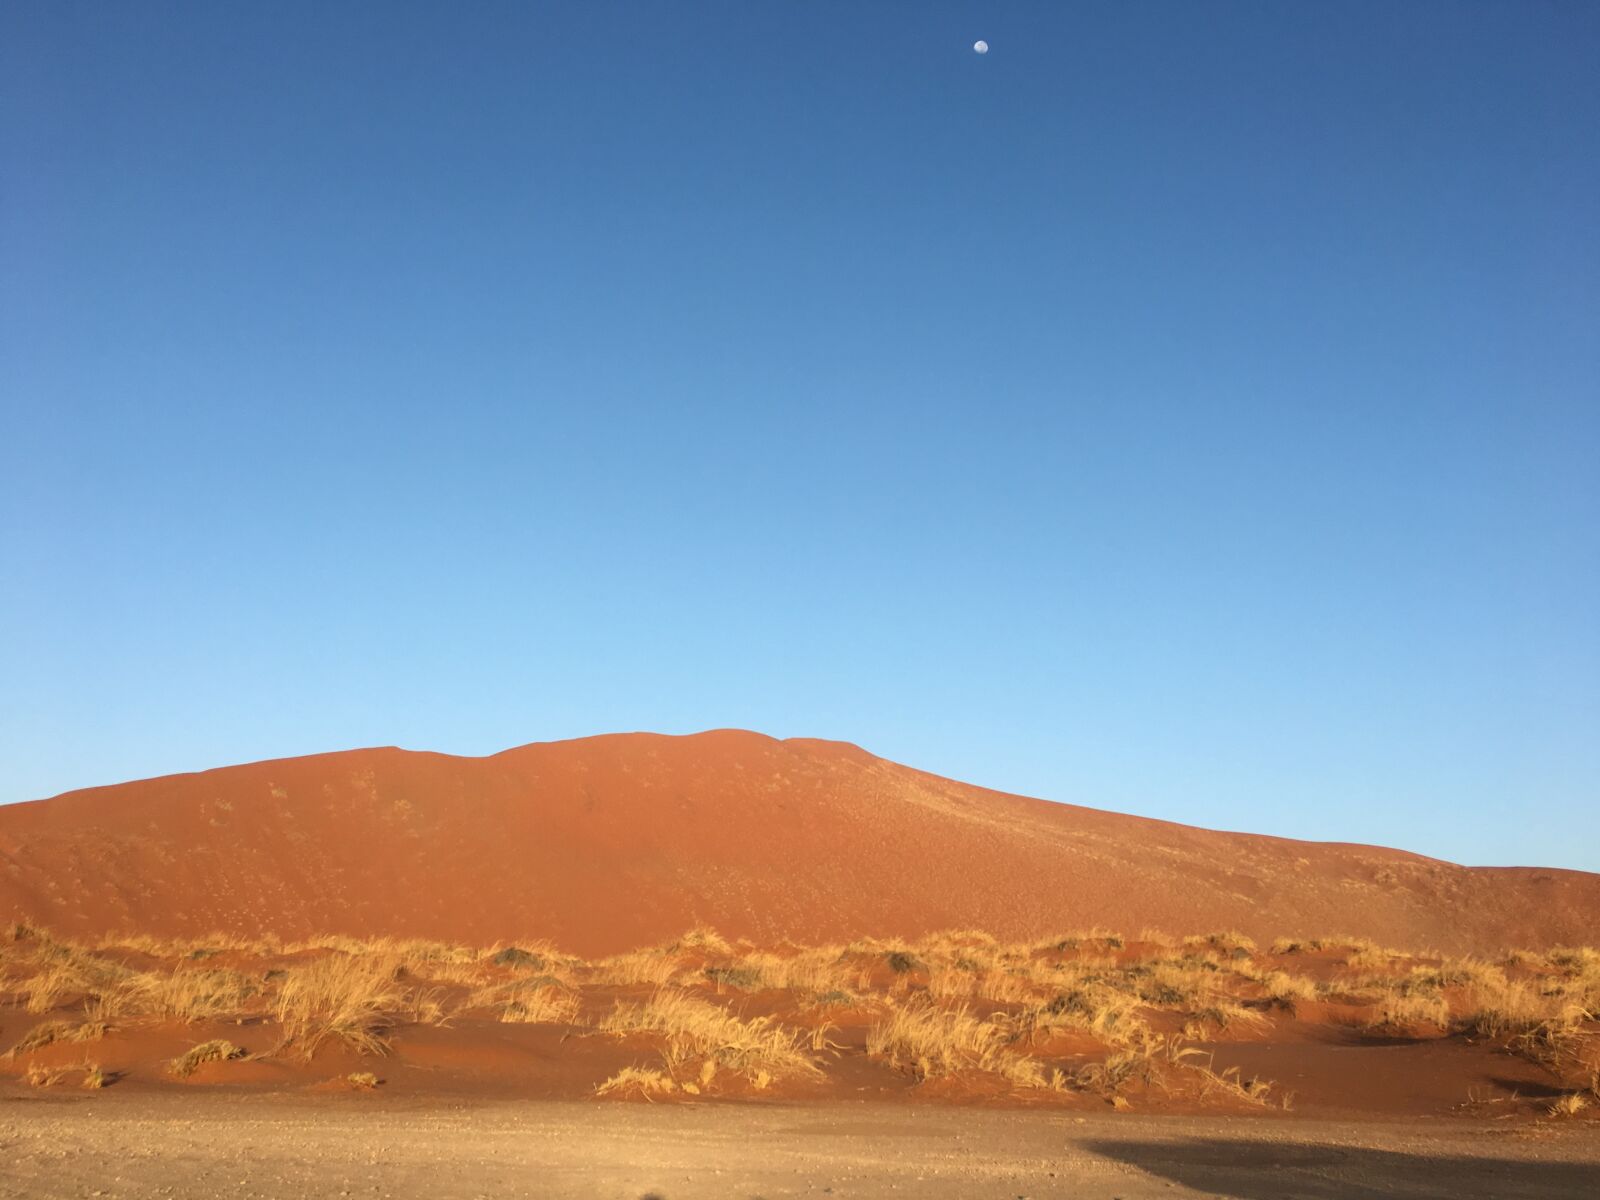 Apple iPhone 6s + iPhone 6s back camera 4.15mm f/2.2 sample photo. Desert, namibia, soussuvlei photography